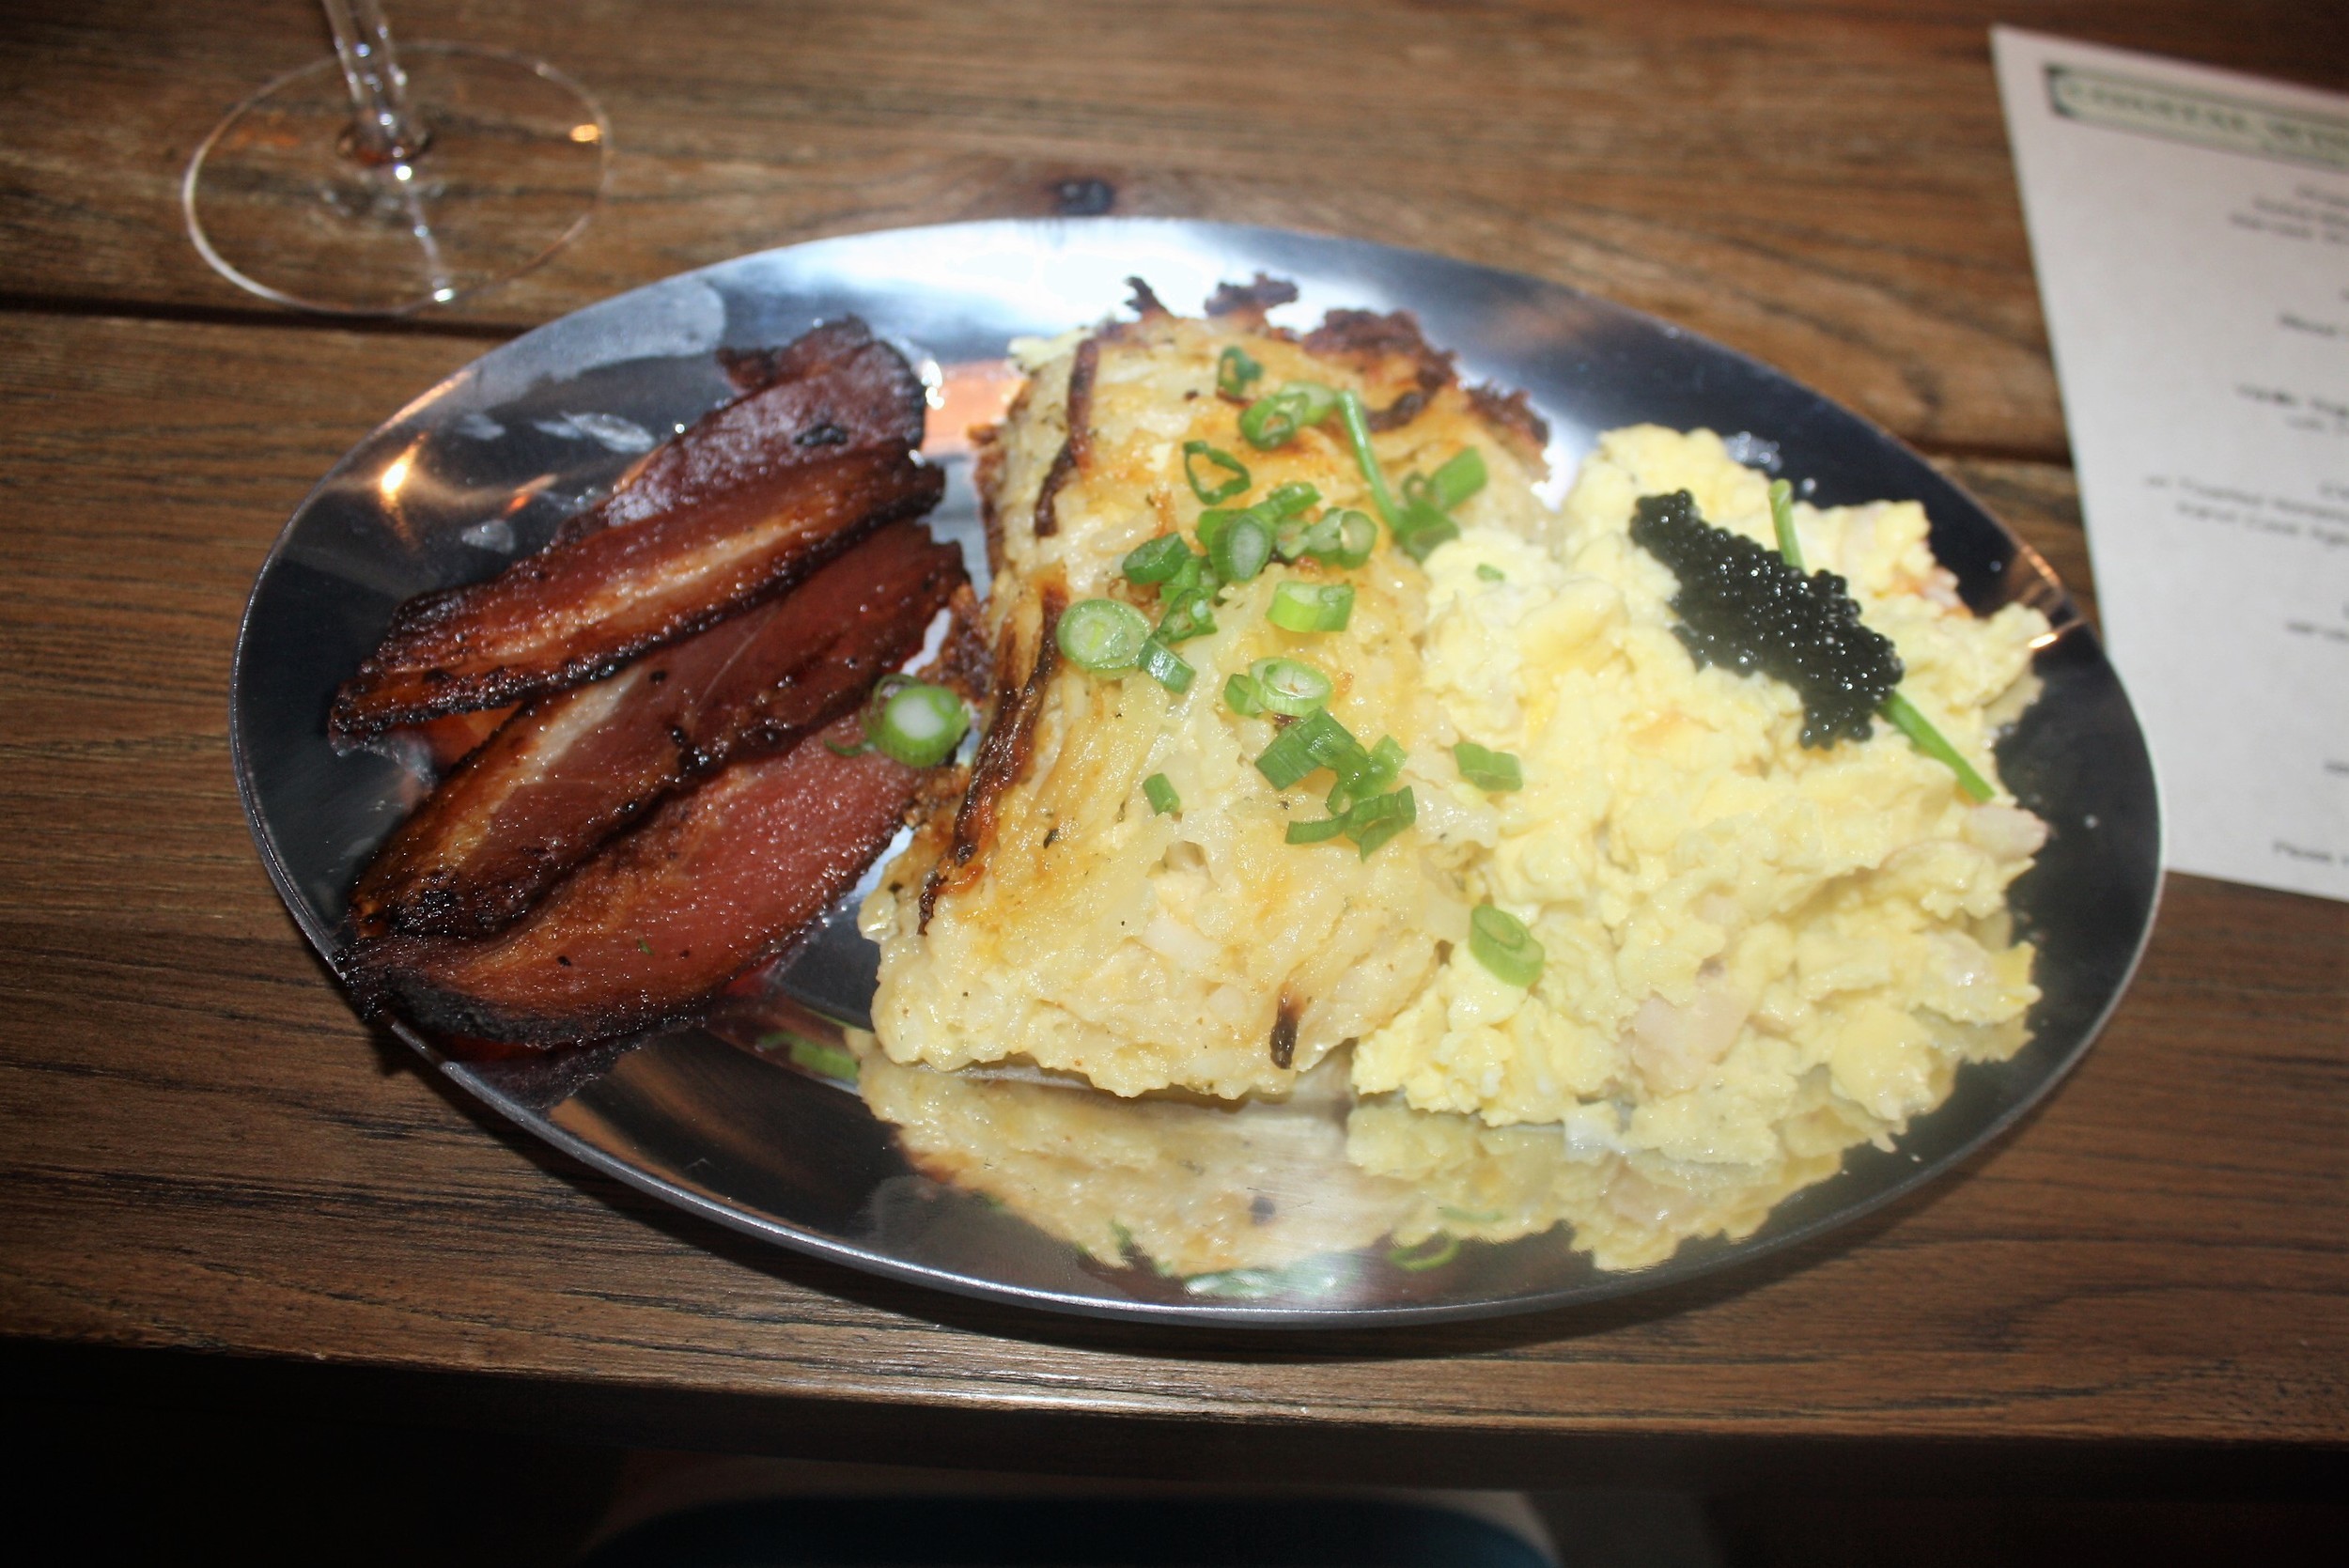 Lobster scrambled eggs with bacon and hash brown casserole